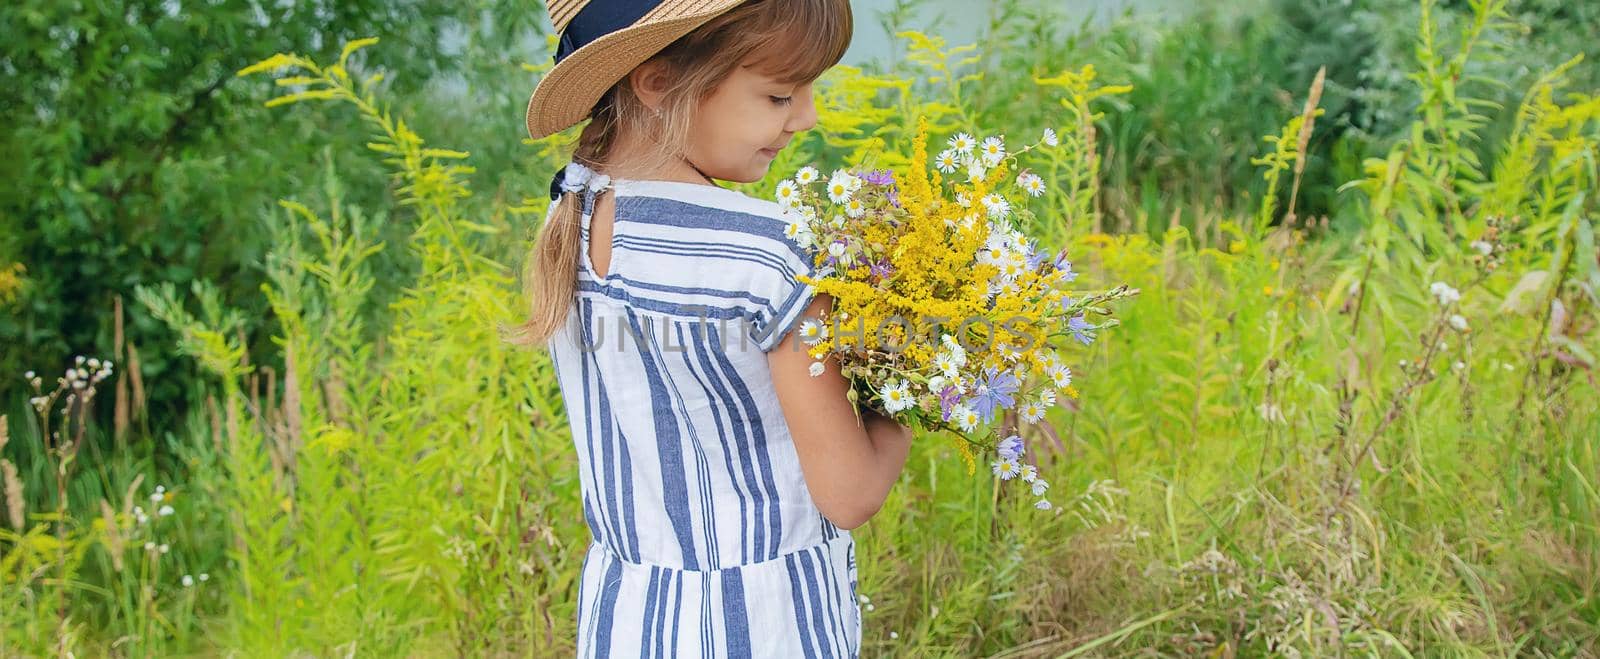 girl holding wildflowers in the hands of a child. Selective focus.